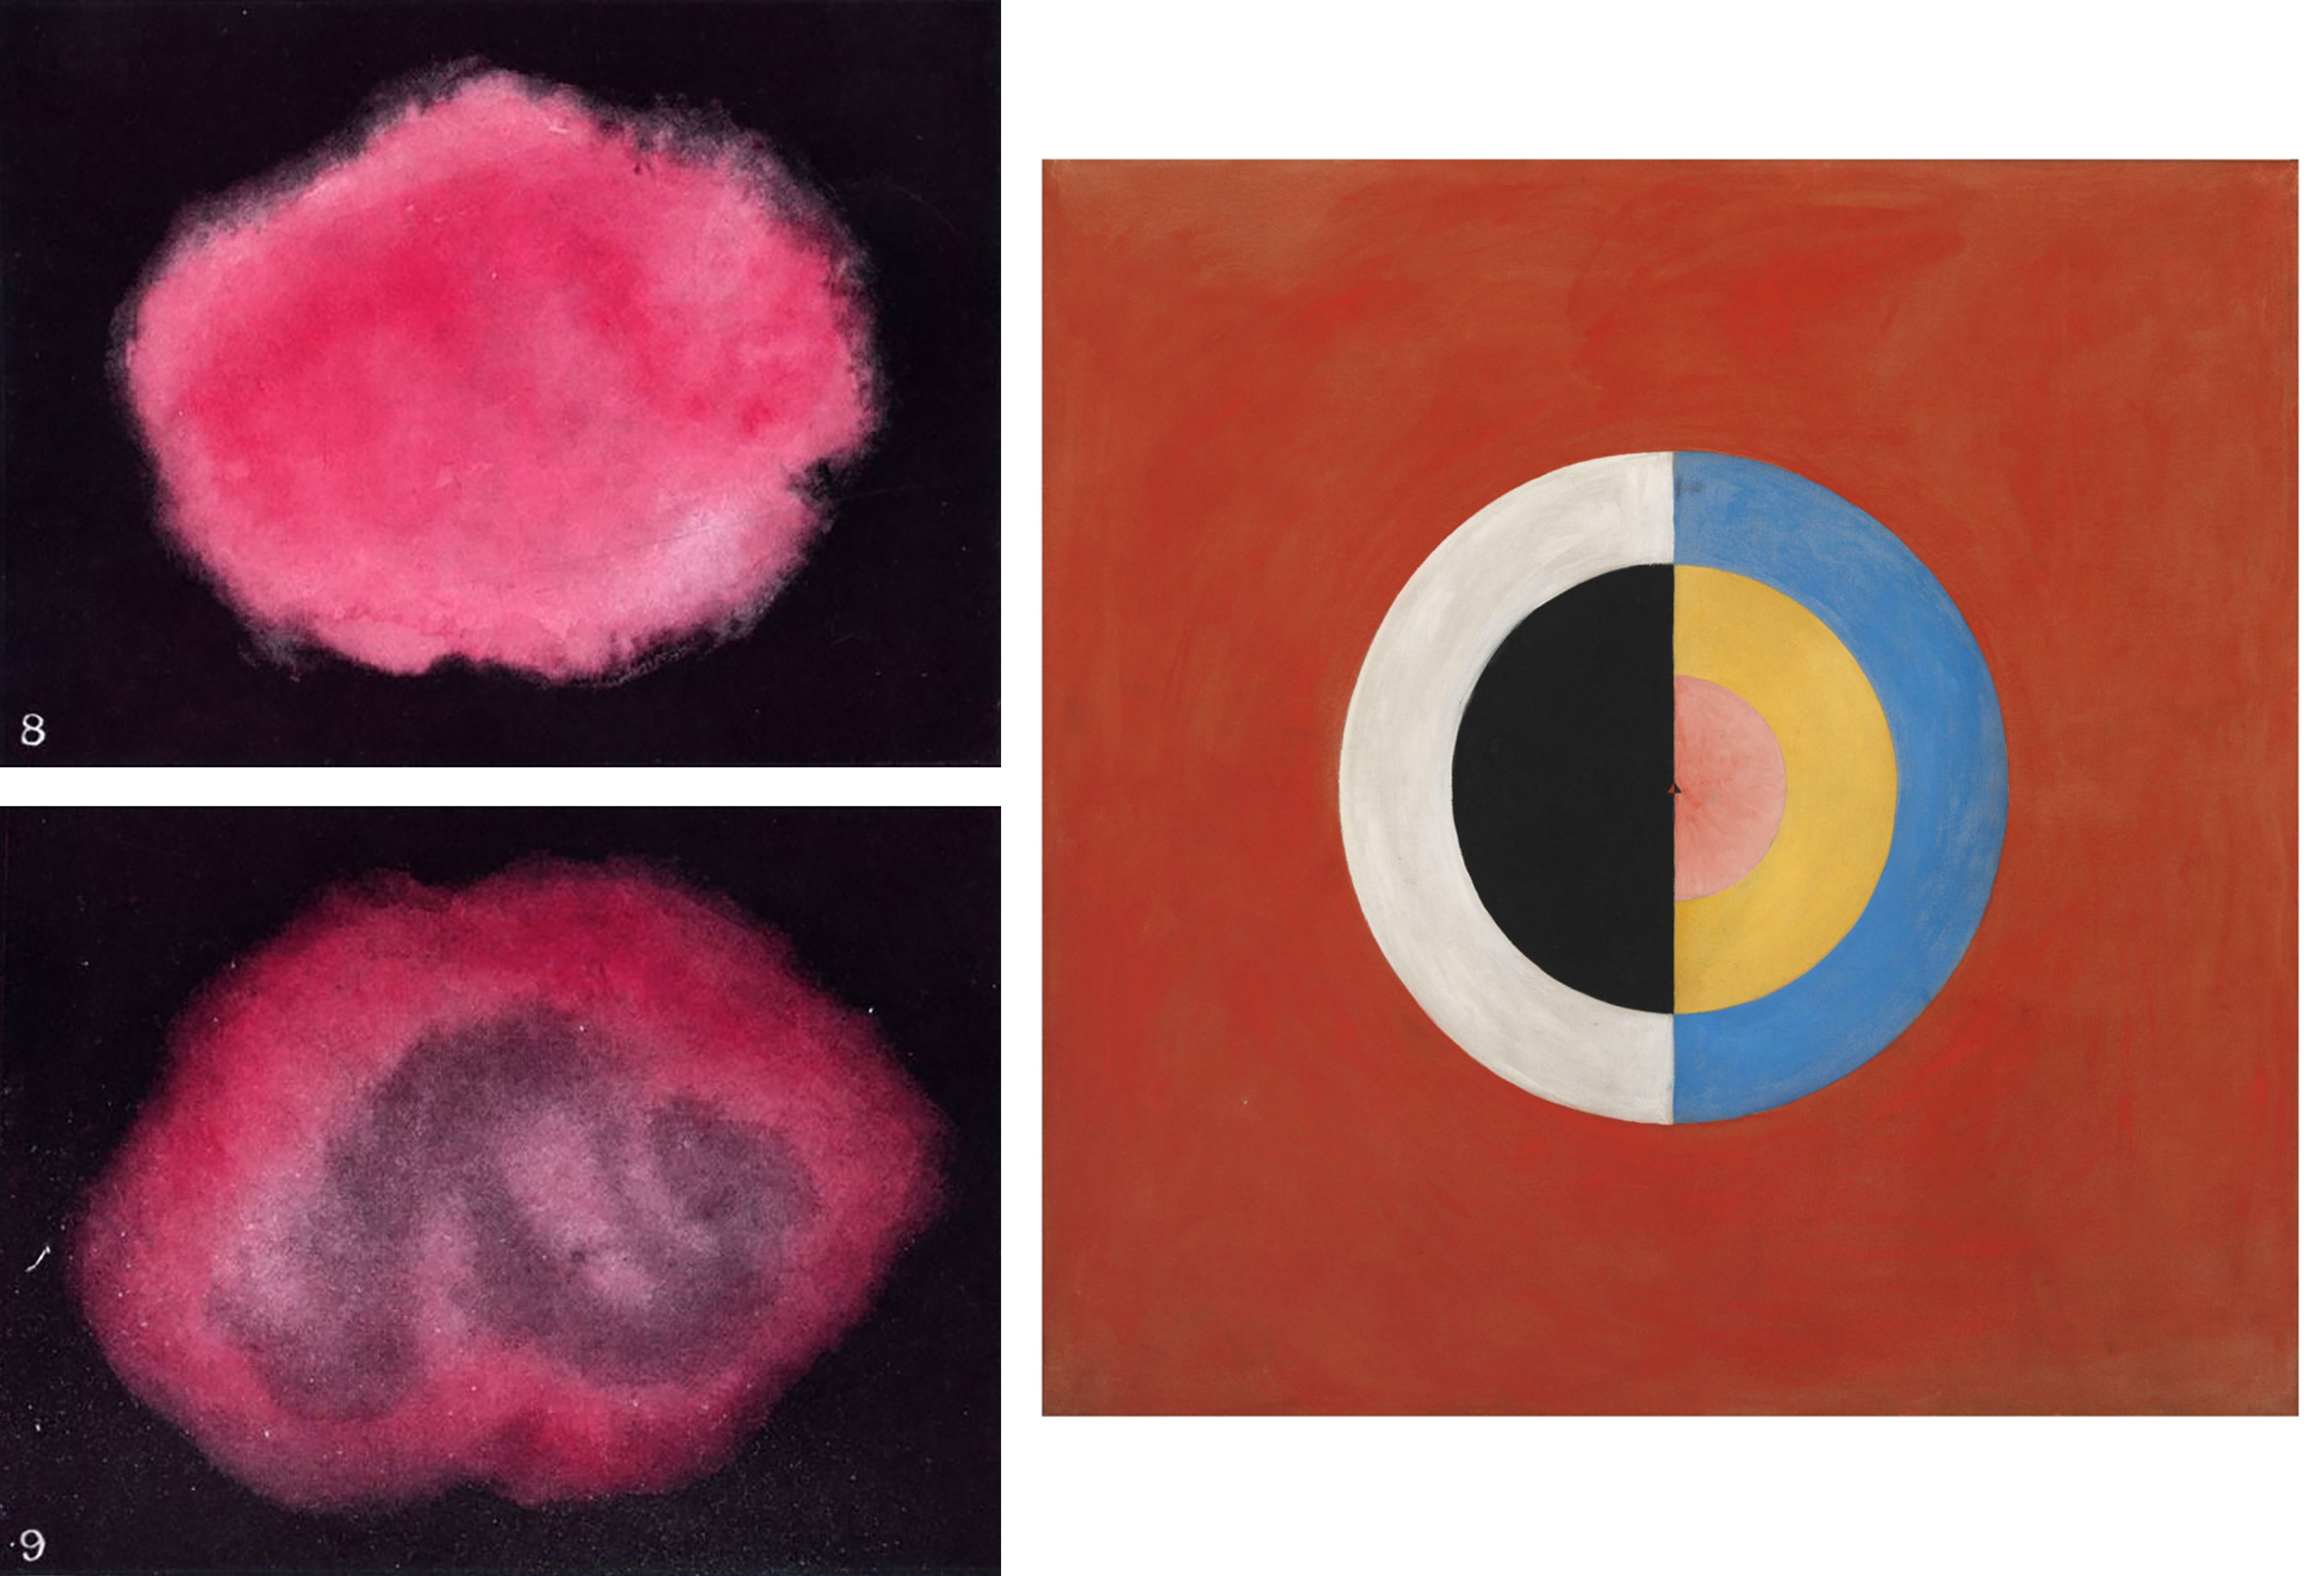 Left: Figures 8 and 9 from Annie Besant and C. W. Leadbeater, Thought Forms, 1905 (London: The Theosophical Publishing House LTD). Right: Hilma af Klint, Group IX/SUW, No. 17. The Swan, 1915, oil on canvas, 150.5 × 151 cm (Moderna Museet / Stockholm).